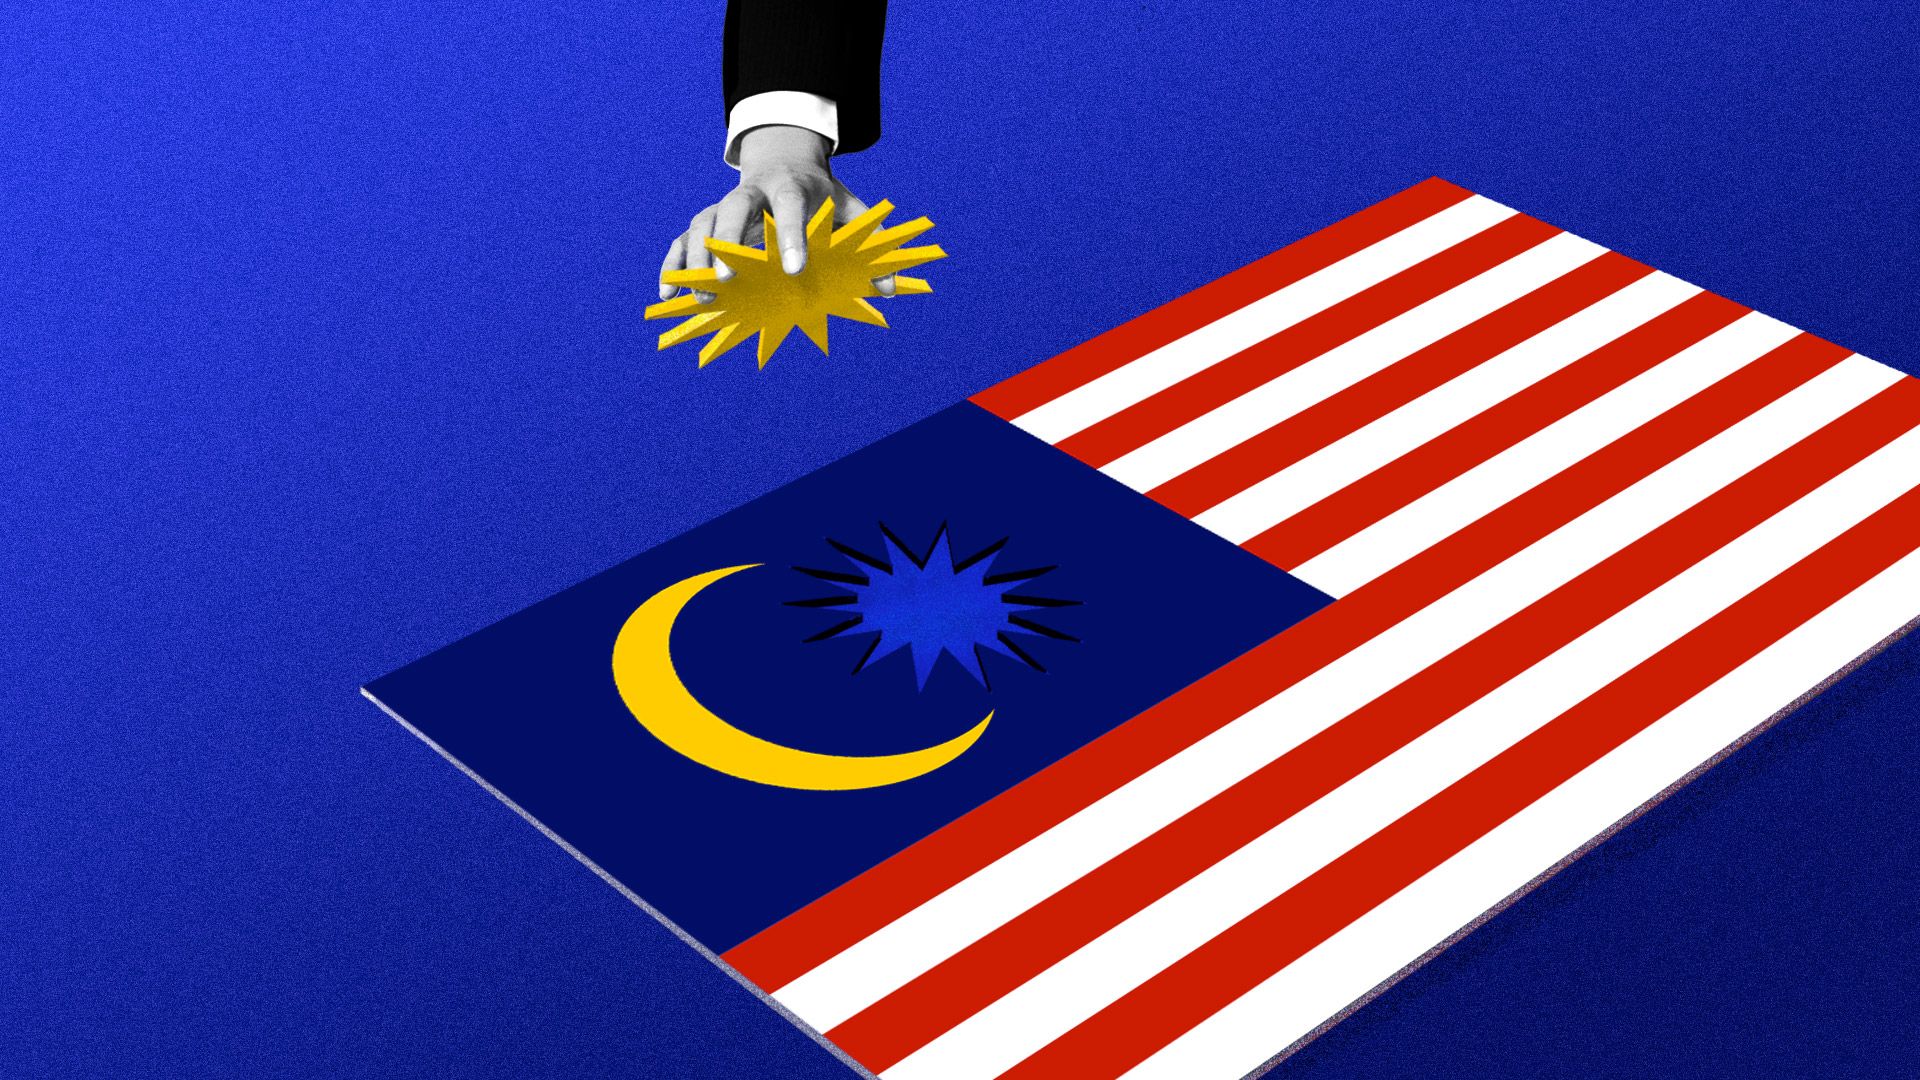 A hand pulling the star from the Malaysian flag